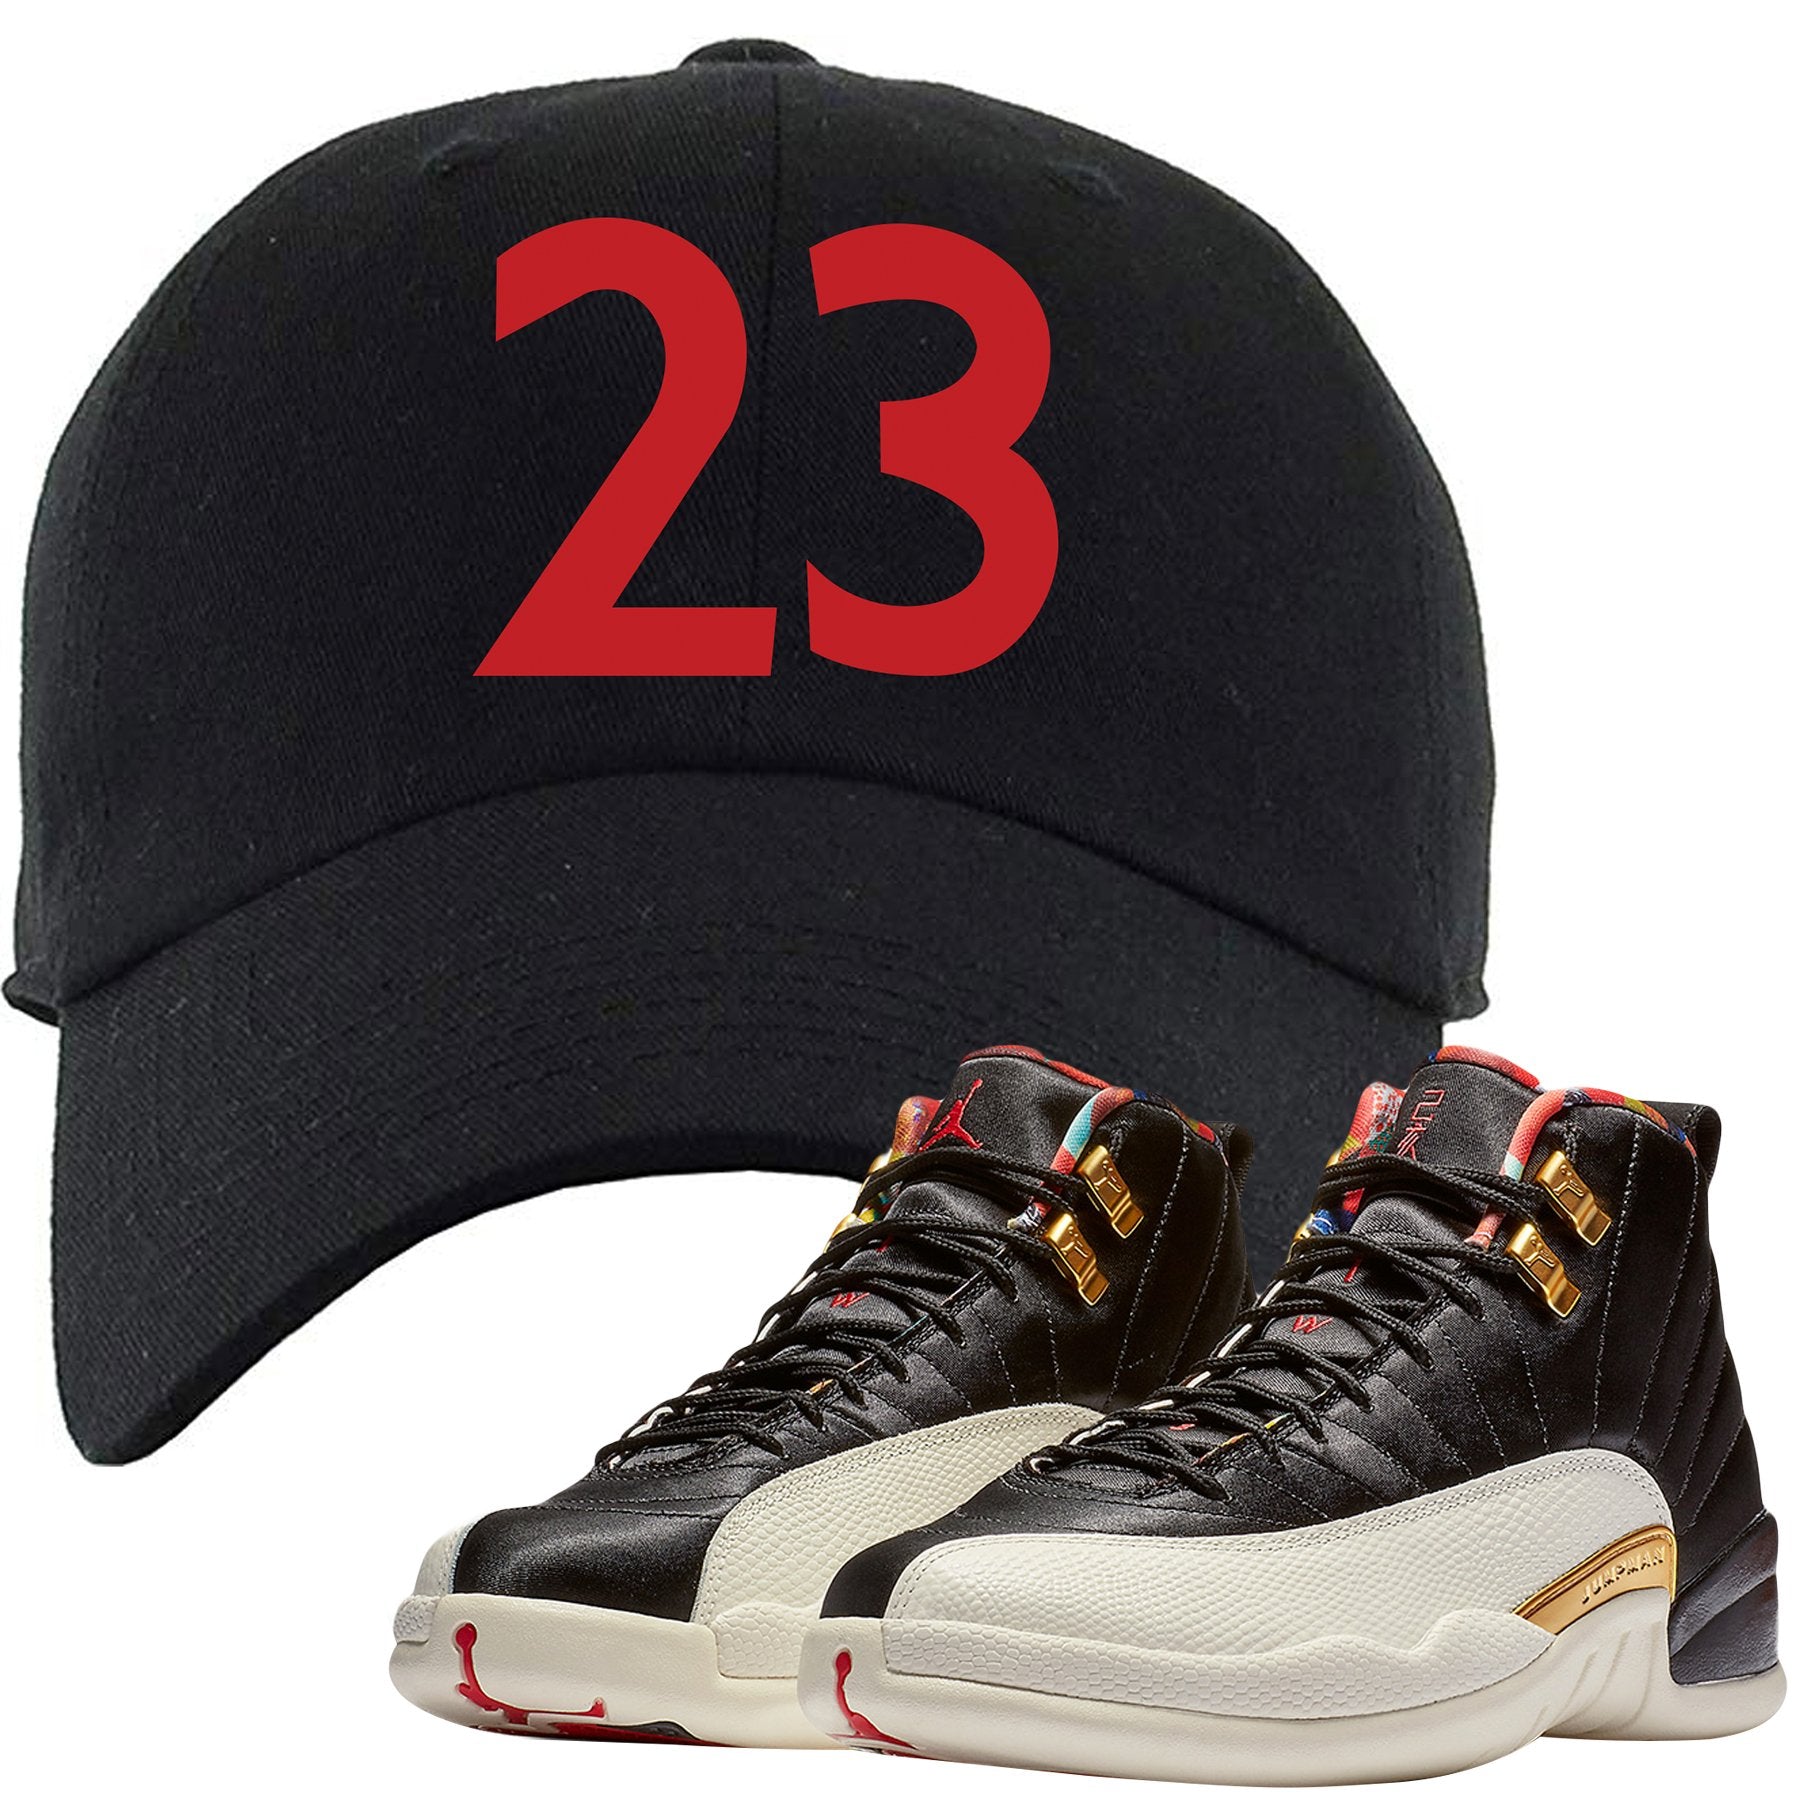 Rock this Jordan 12 Chinese New Year sneaker matching dad hat to complete your Chinese 12s sneaker matching outfit